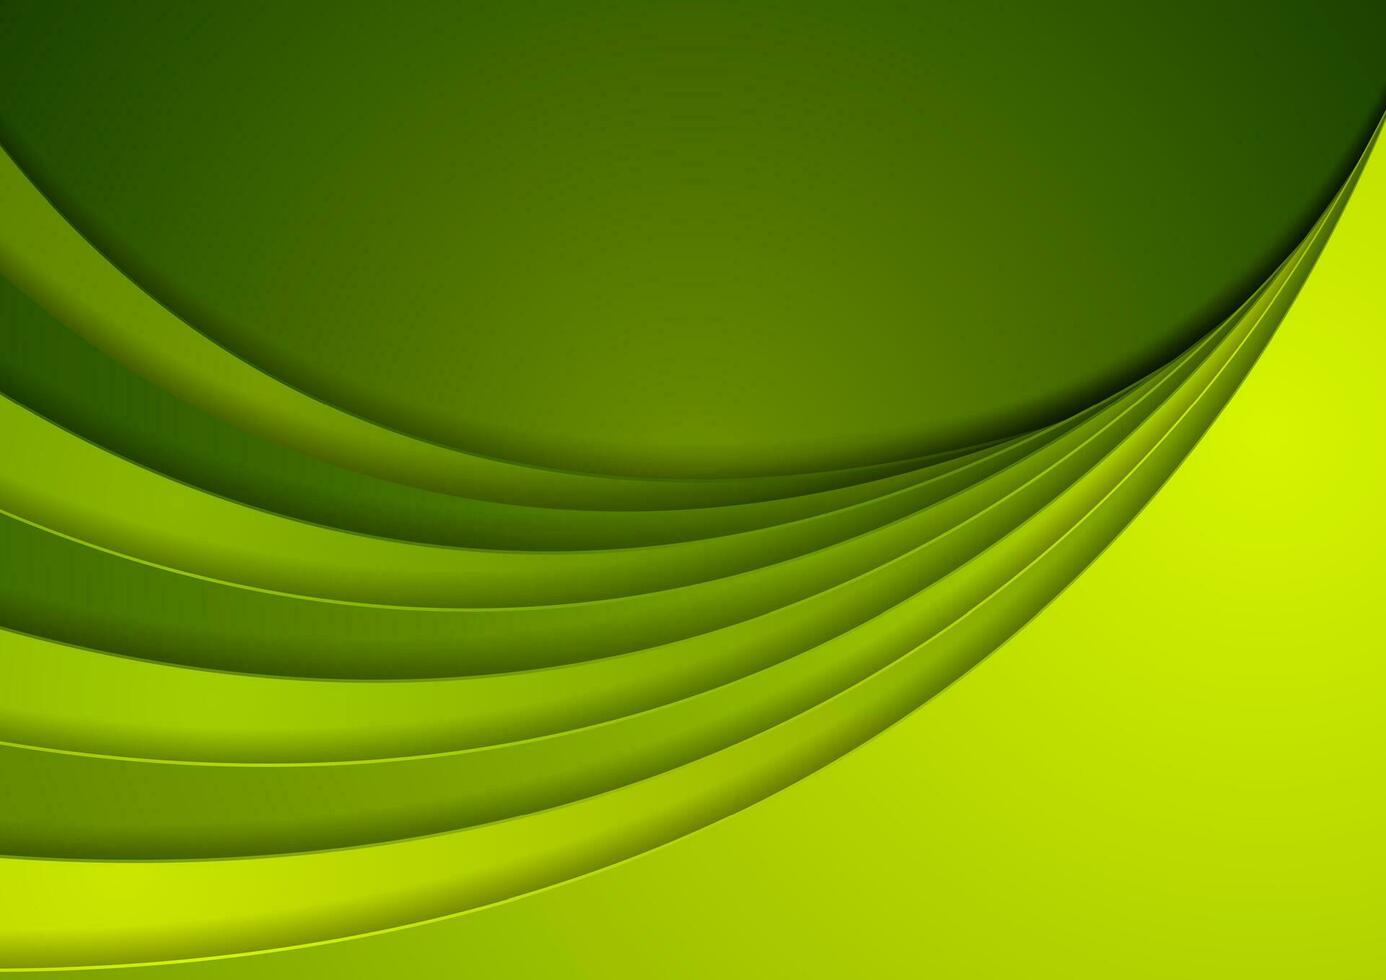 Green corporate wavy abstract background vector